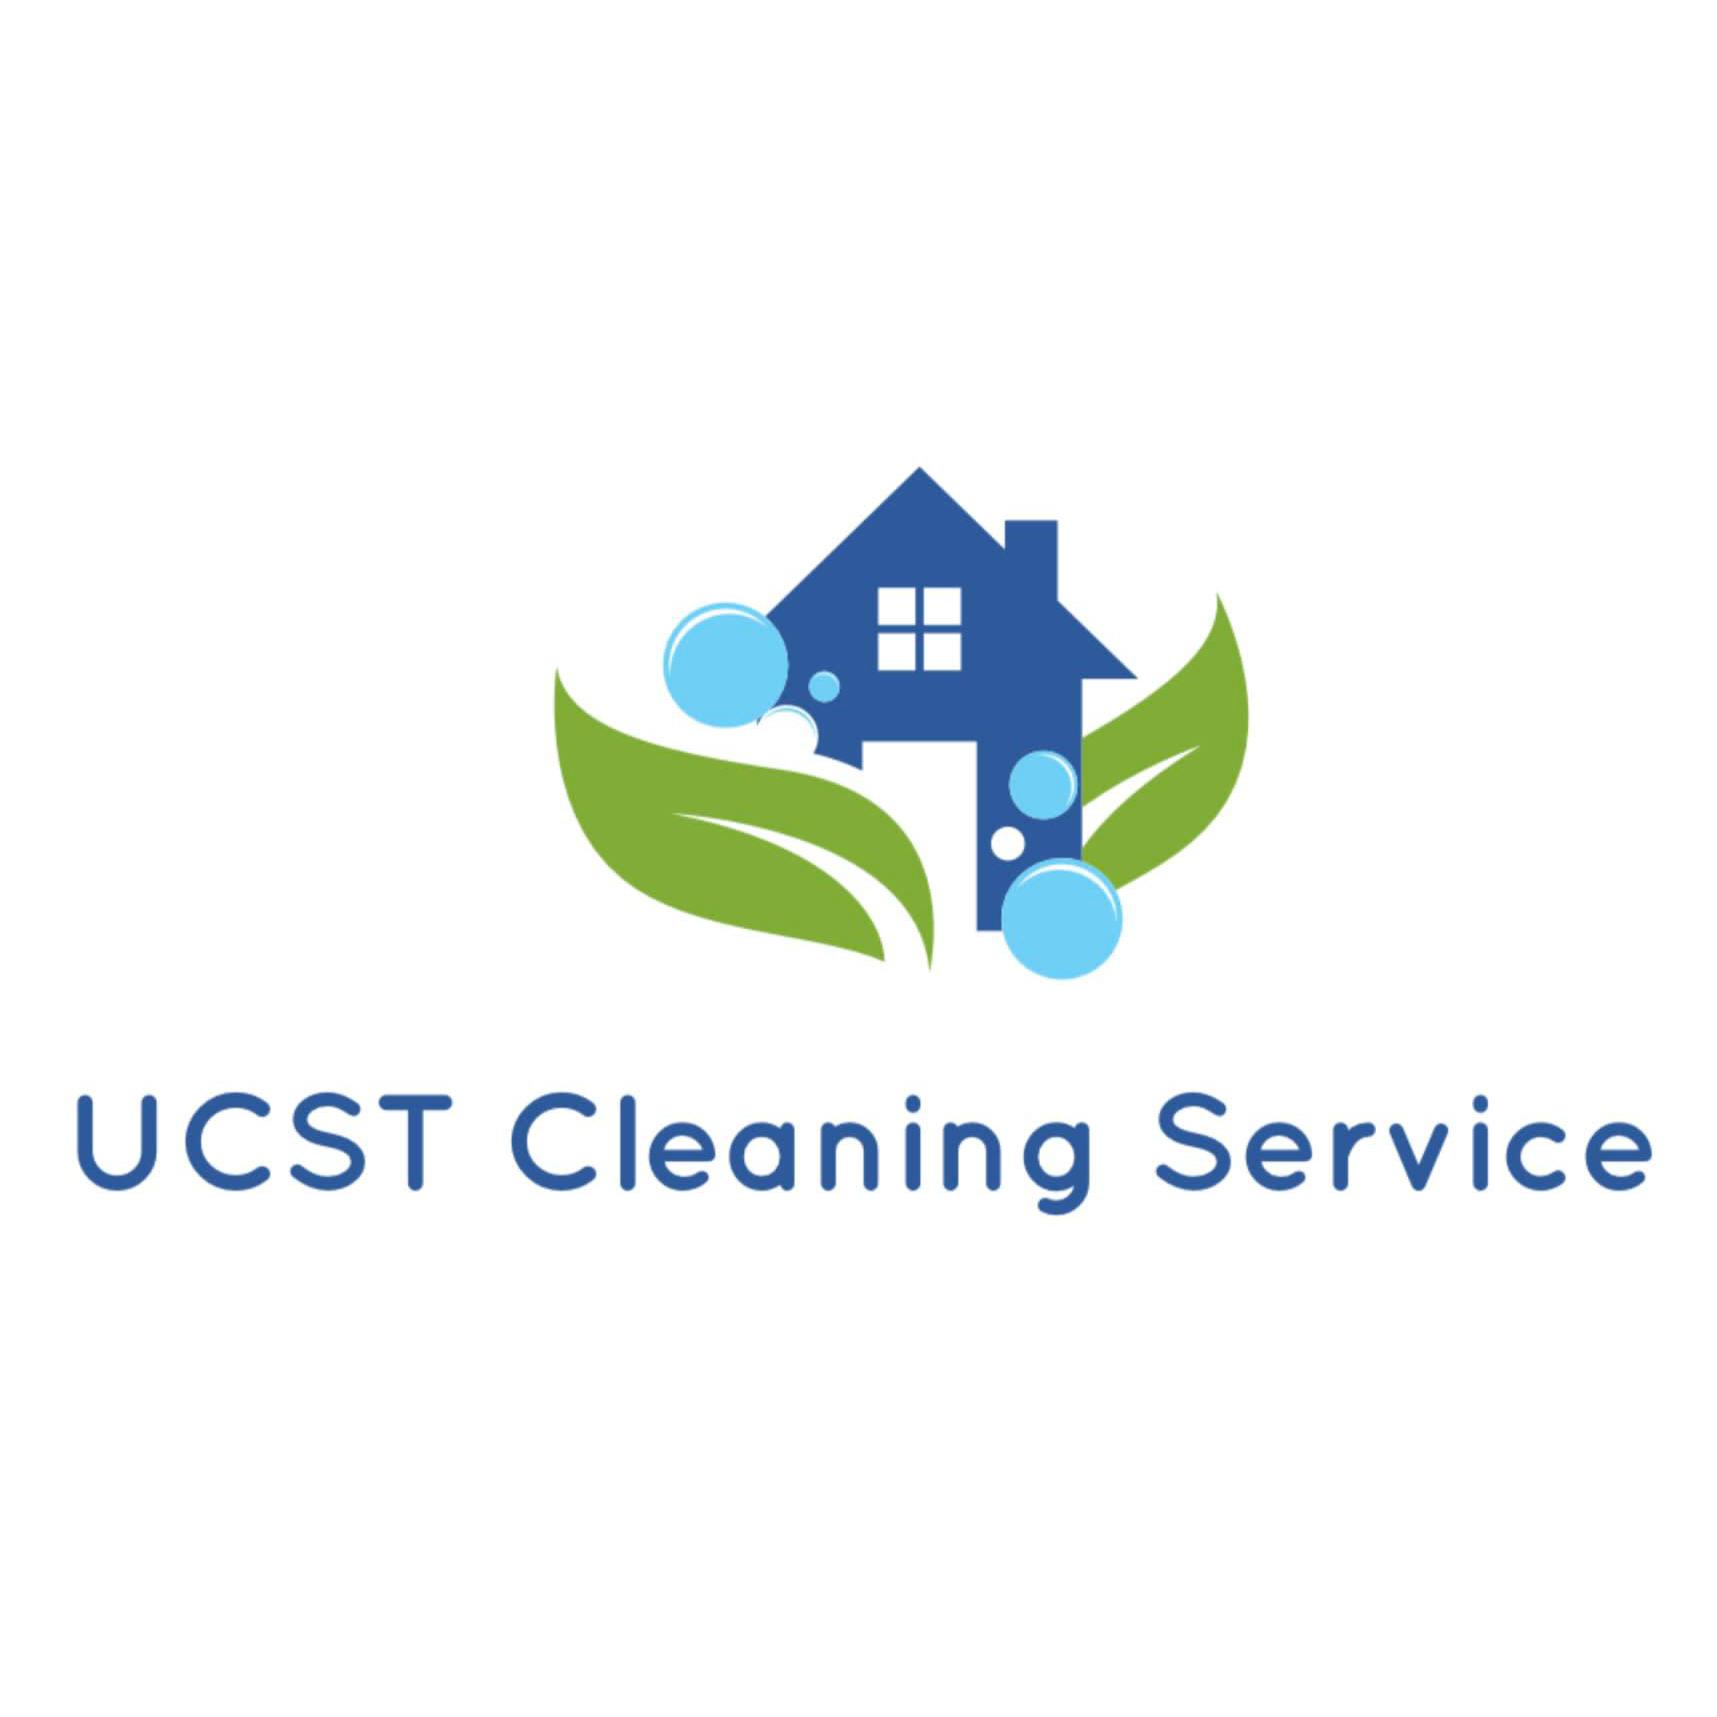 UCST Cleaning Services logo